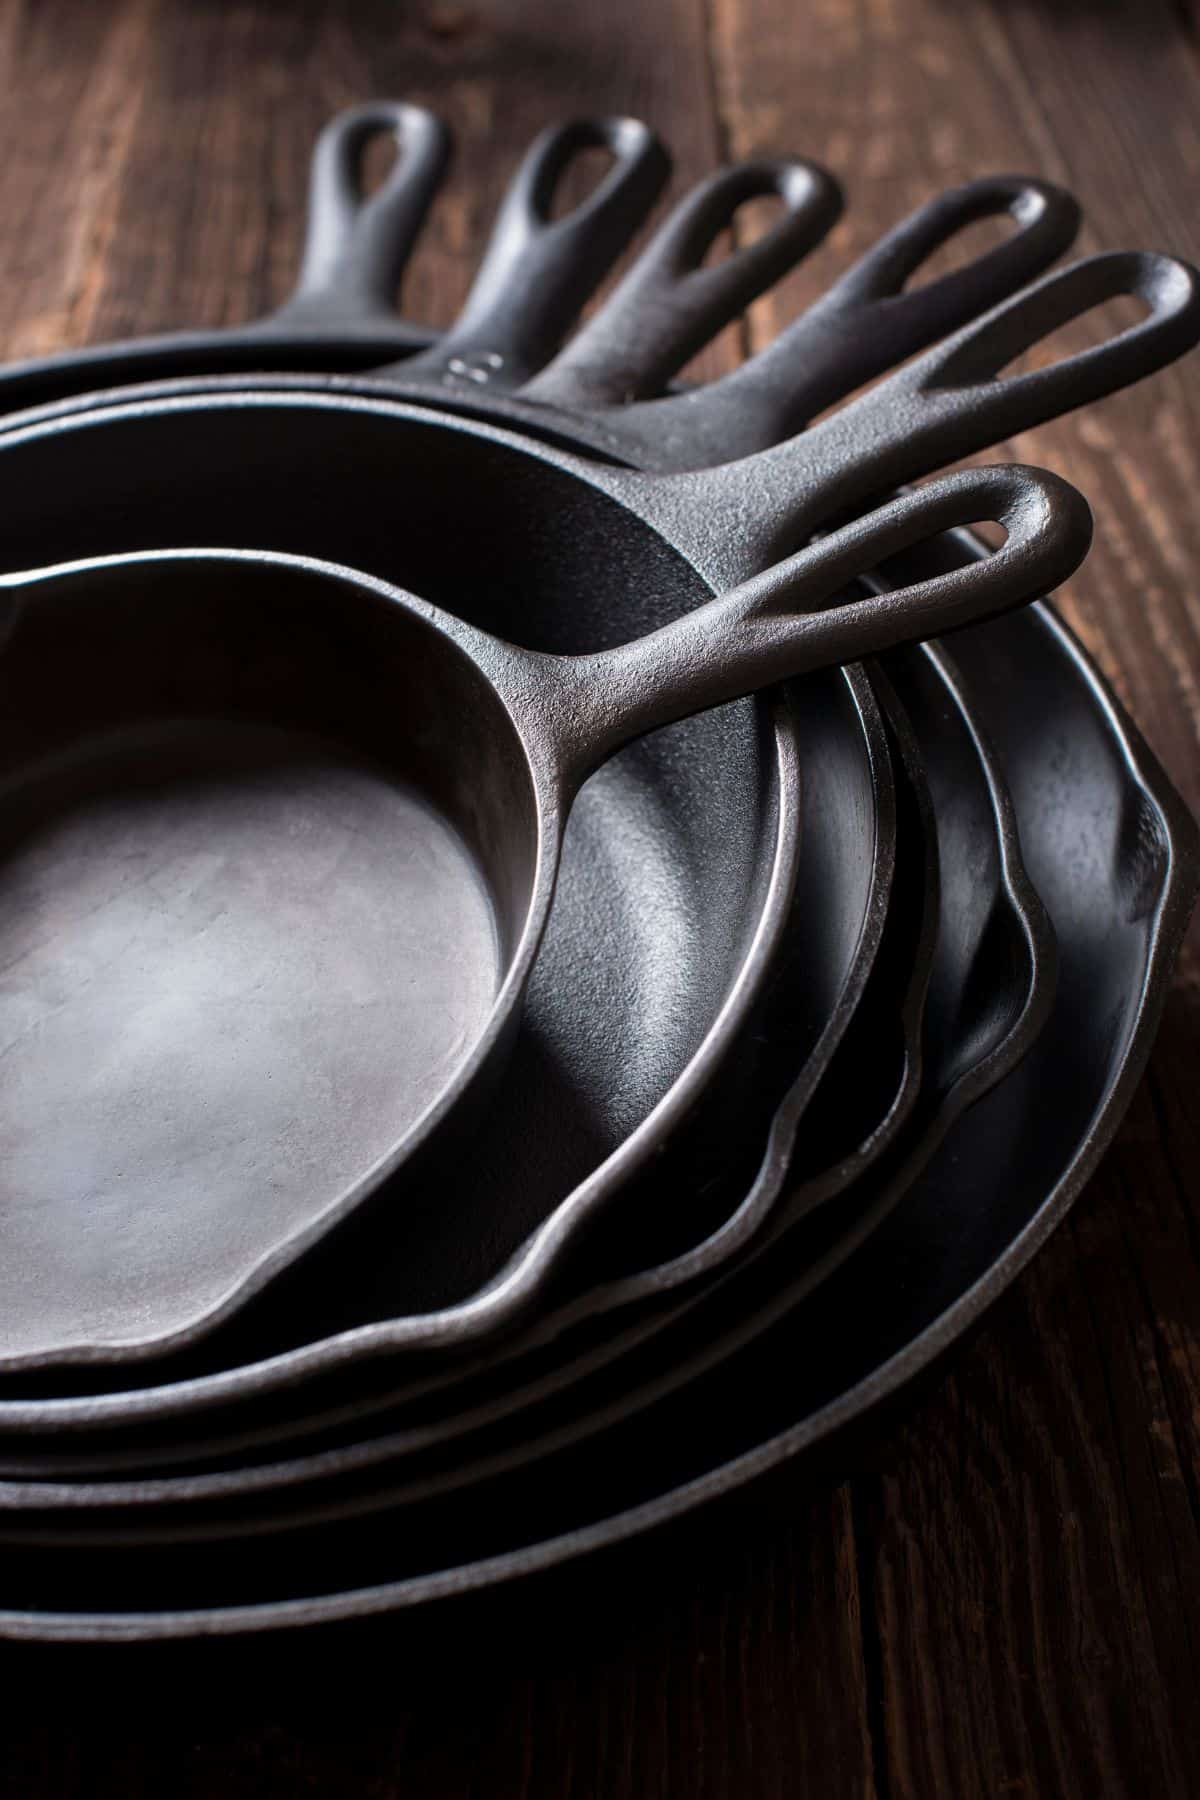 Stack of six cast iron skillets nested inside one another with their handles forming a swirl shape.